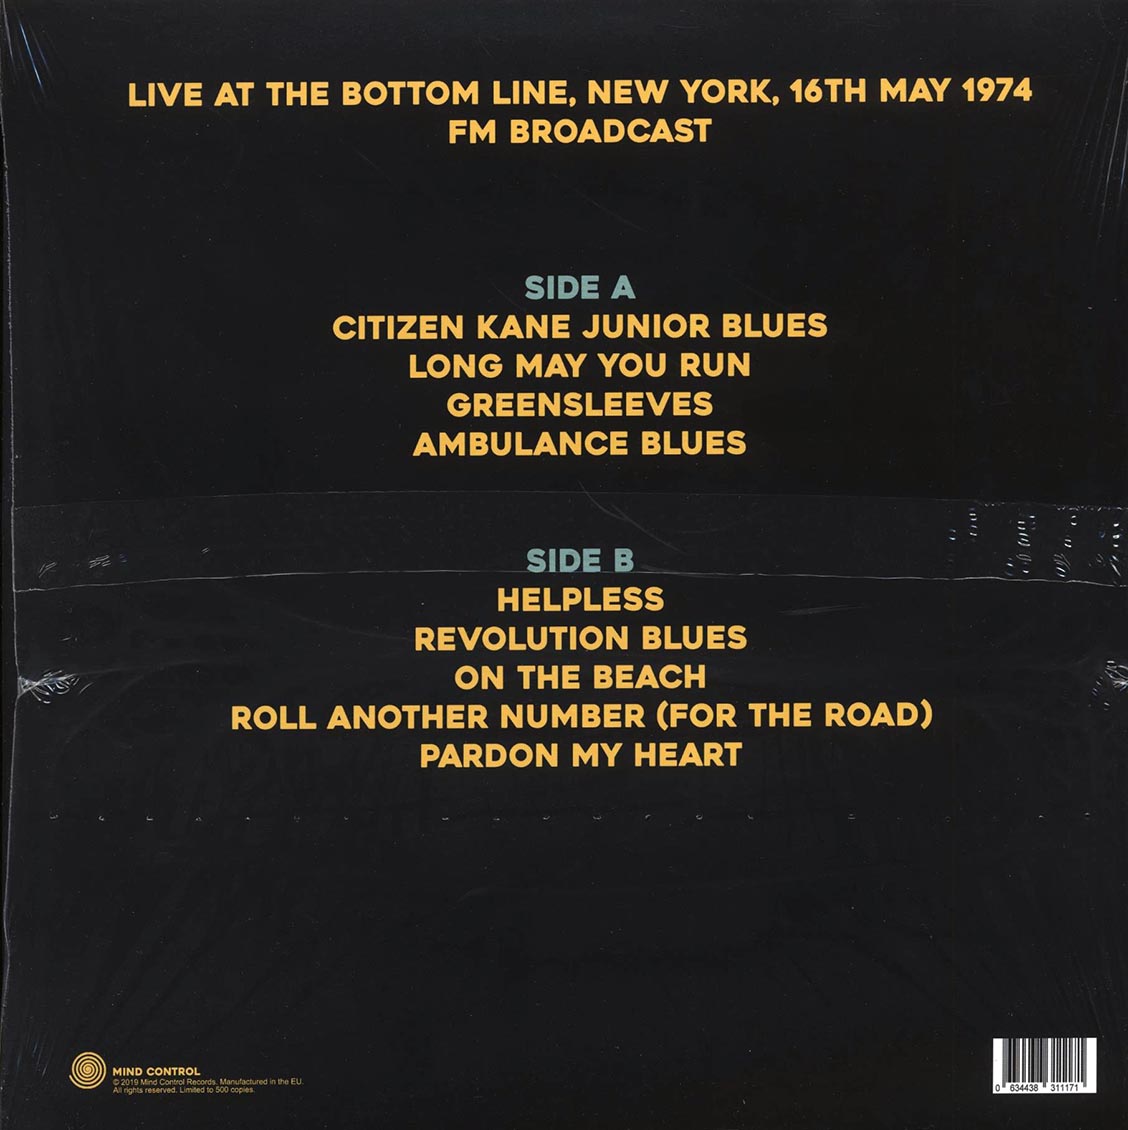 Neil Young - Revolution Blues: Live At The Bottom Line, New York, 16th May 1974 (ltd. 500 copies made) - Vinyl LP, LP